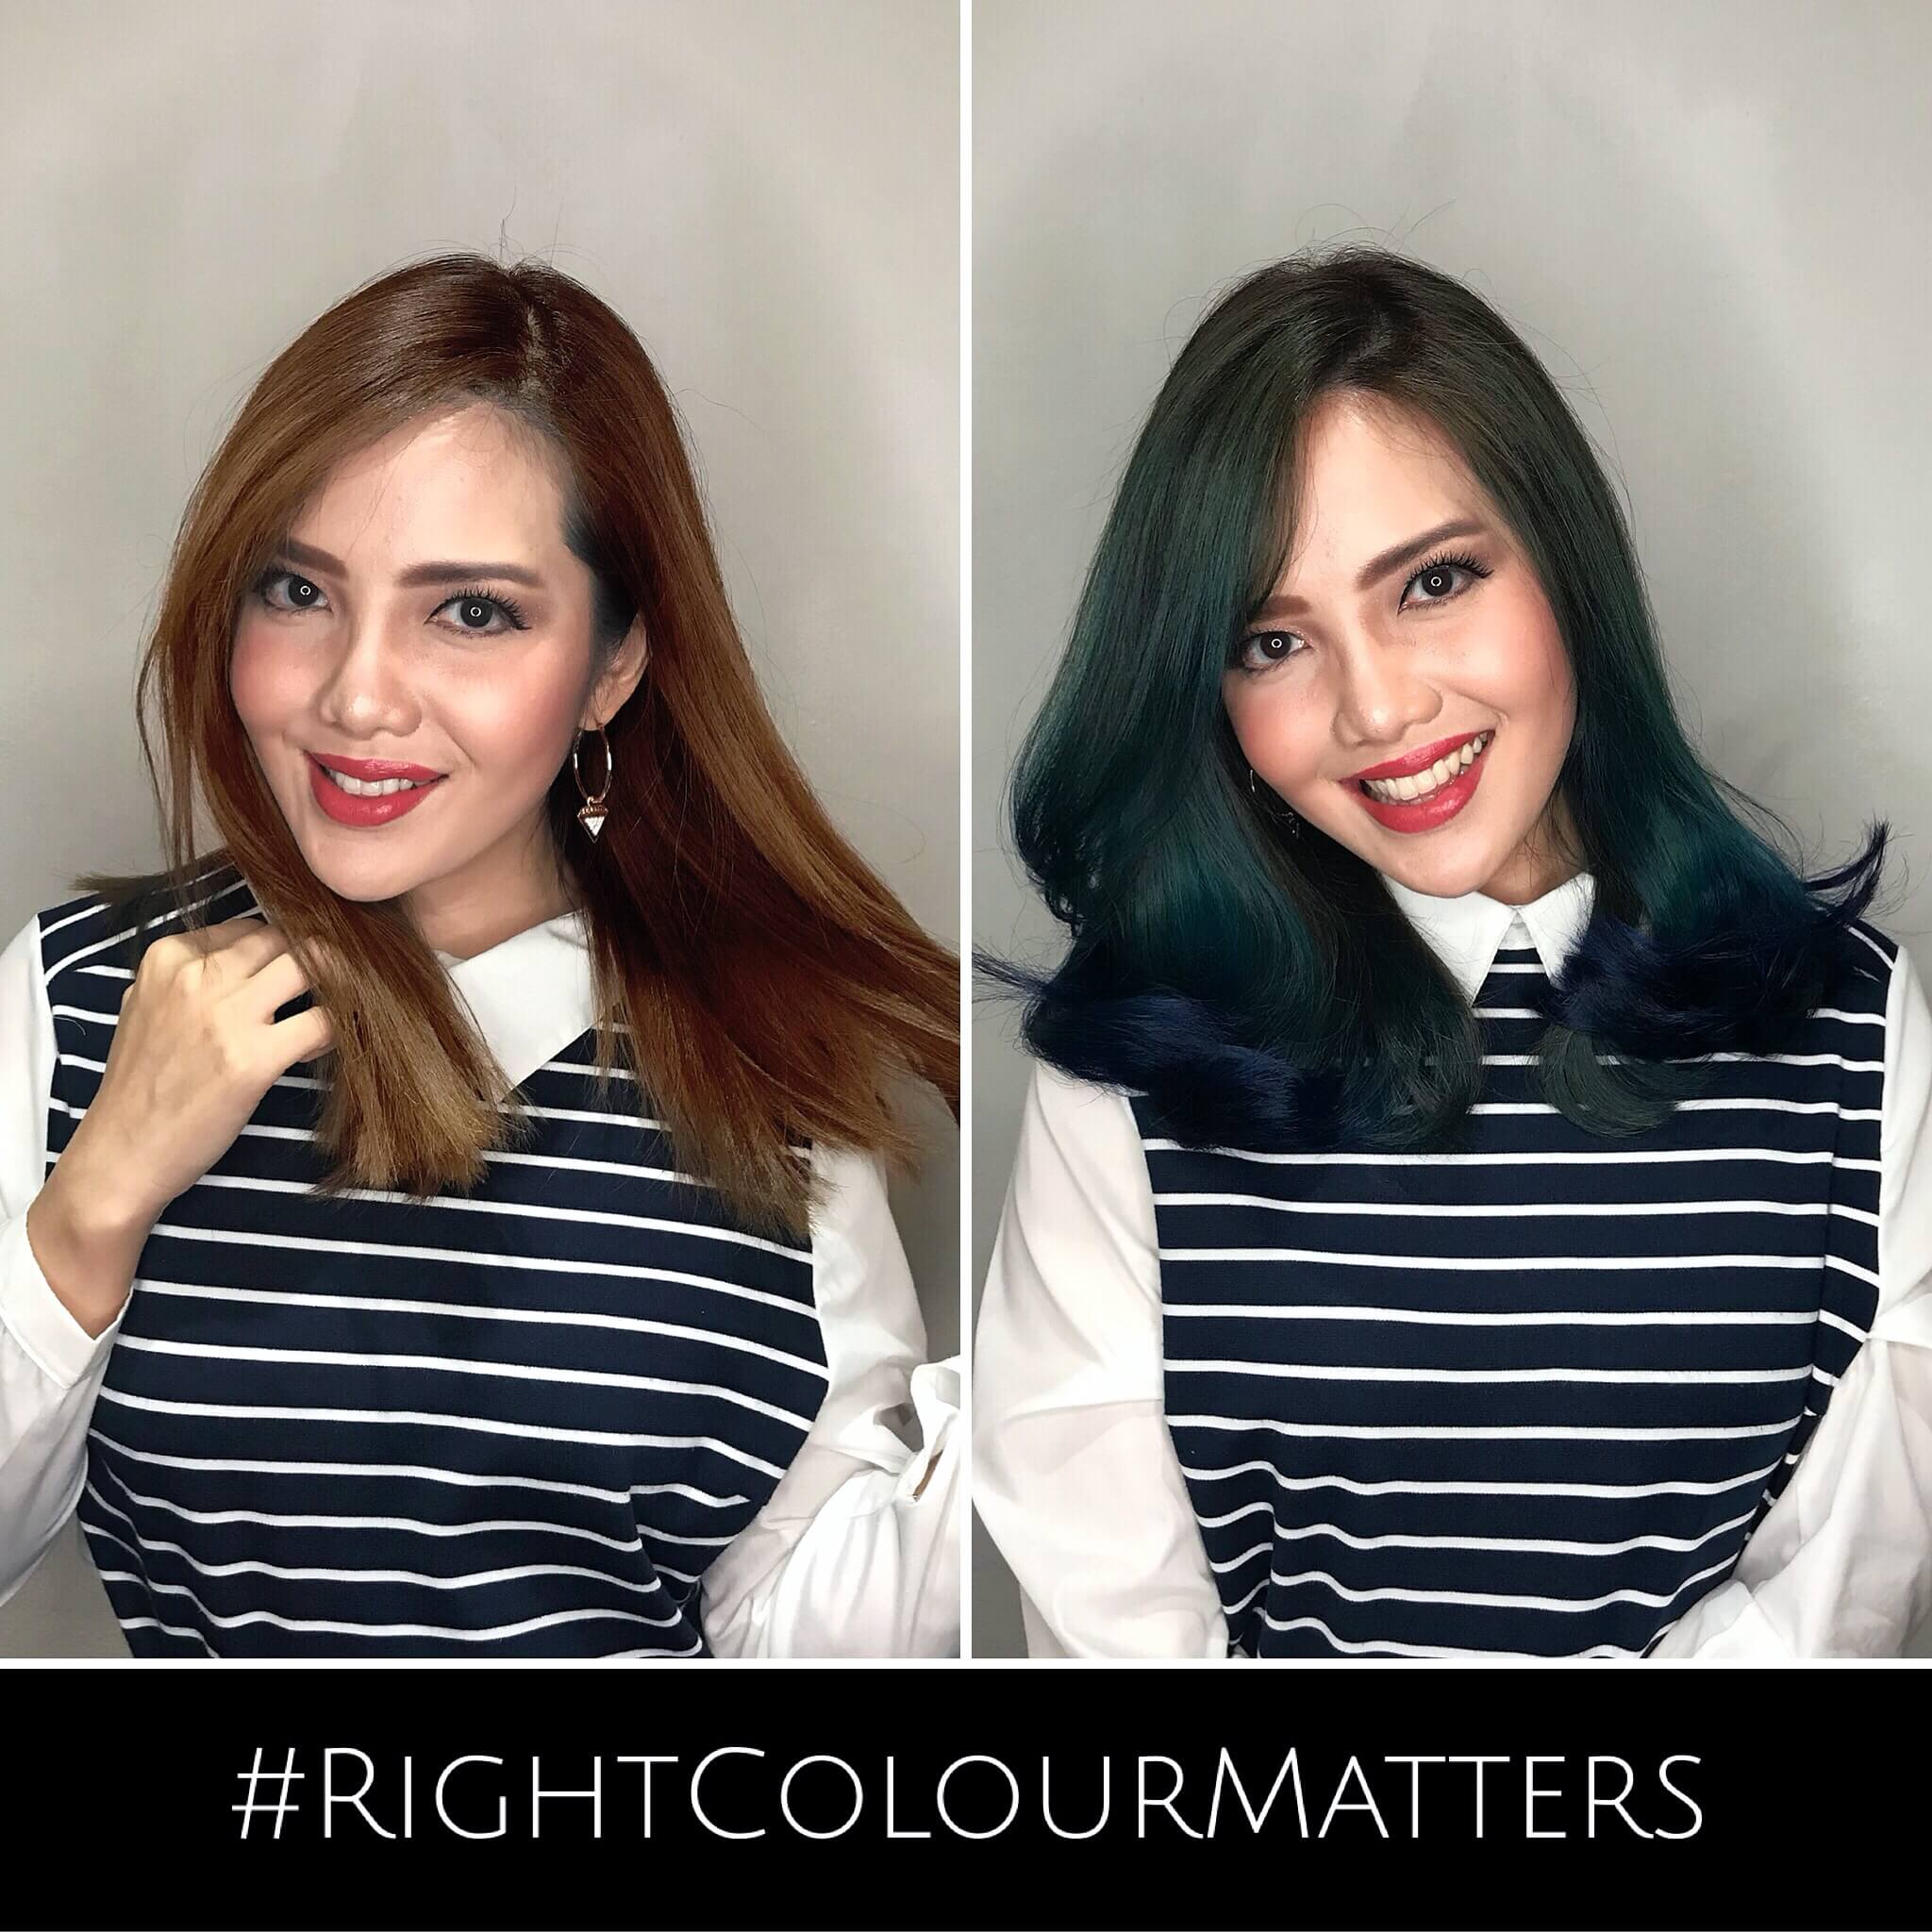 Melted Gemstone Hair designed by Associate Director of Chez Vous Salon, Veyond Chong using #RightColourMatters diagnosis / Model: Melissa